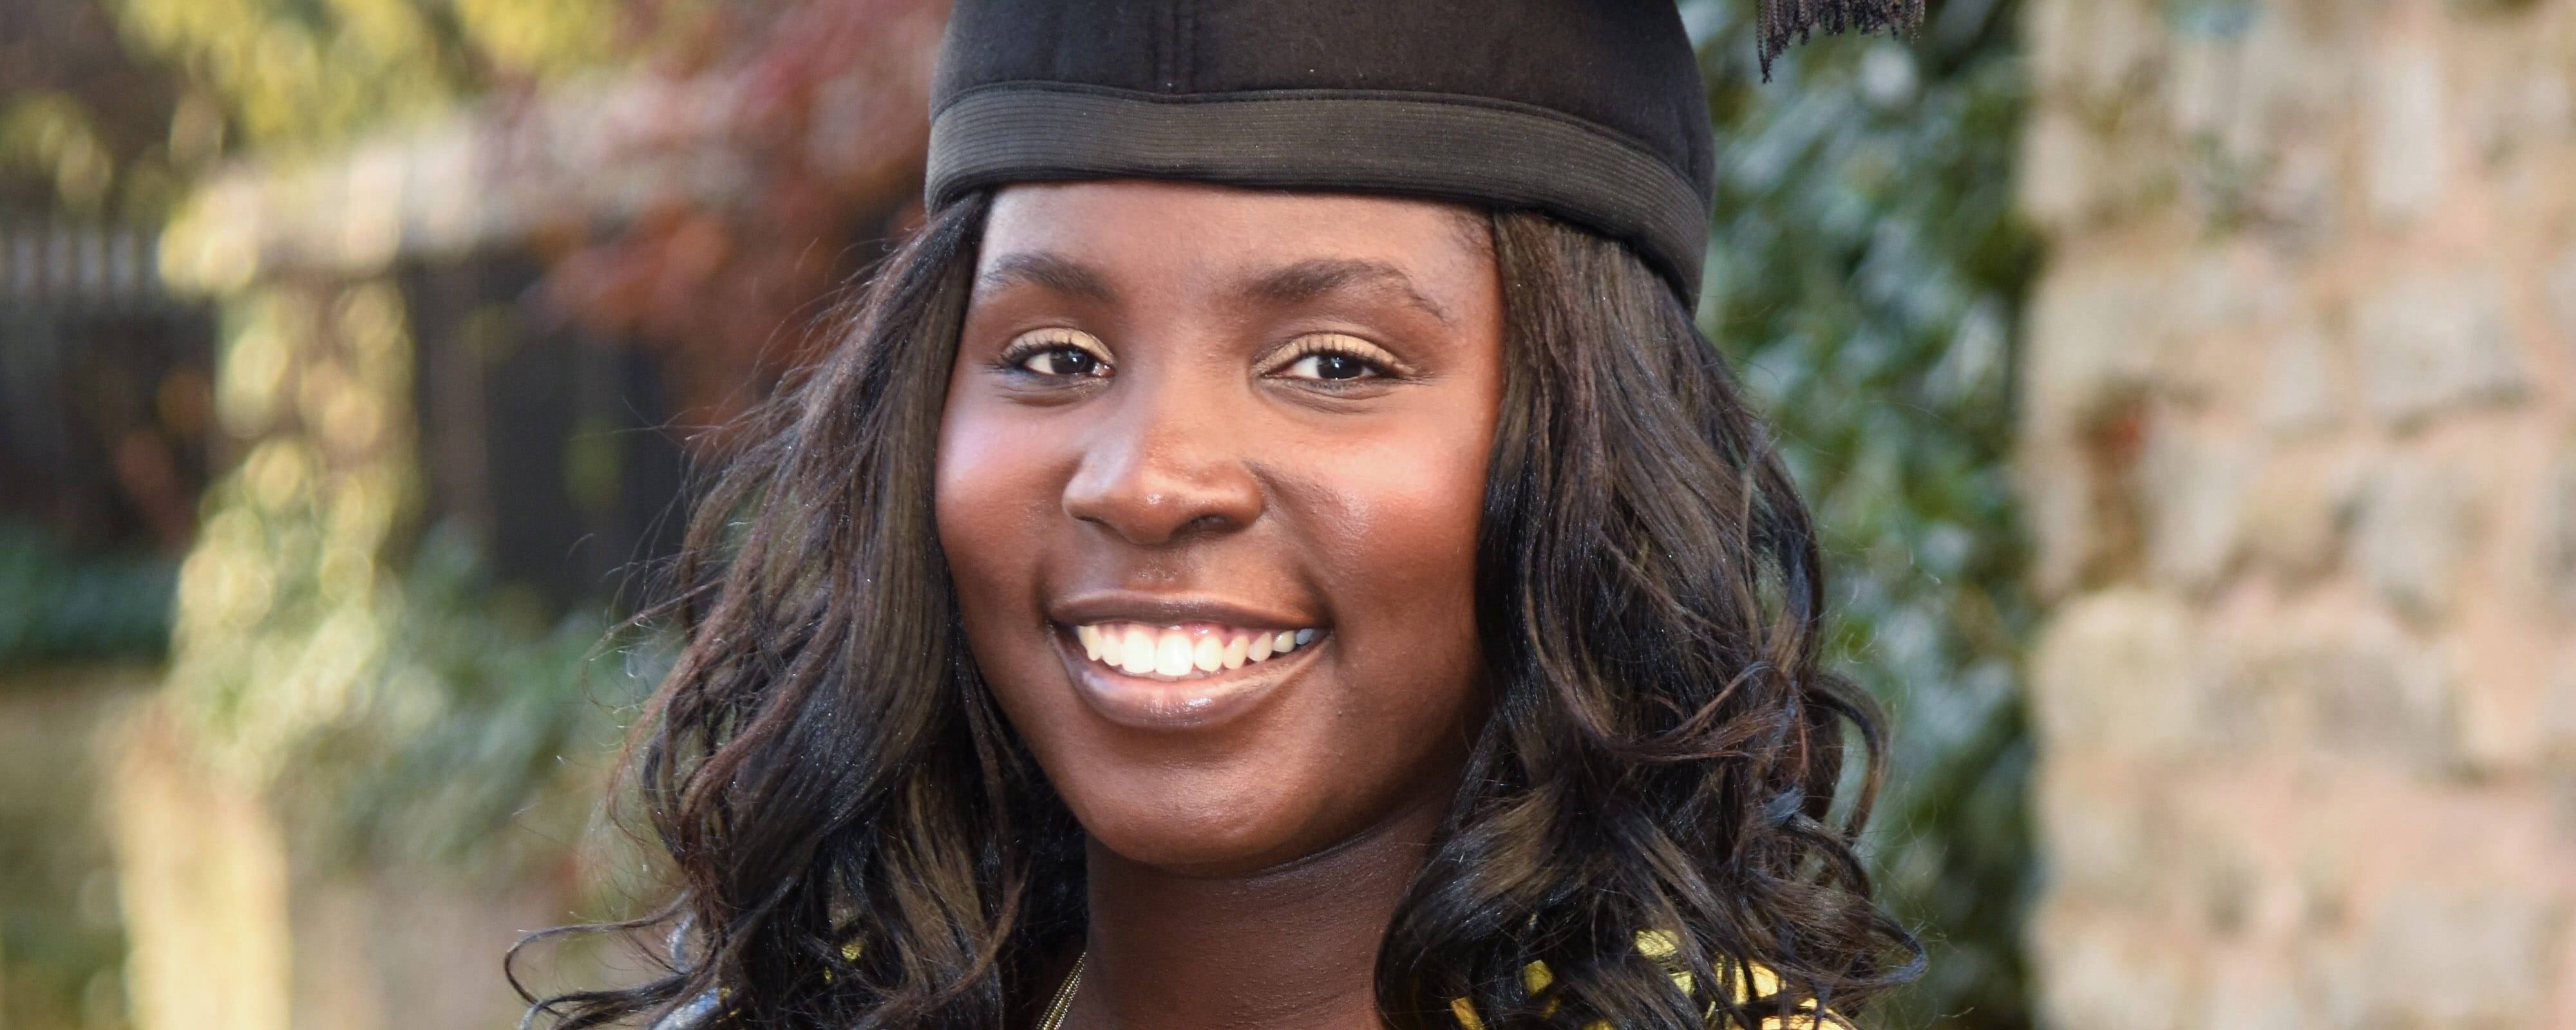 One year on from my higher education student journey – Nicki Artwell-Ikwele